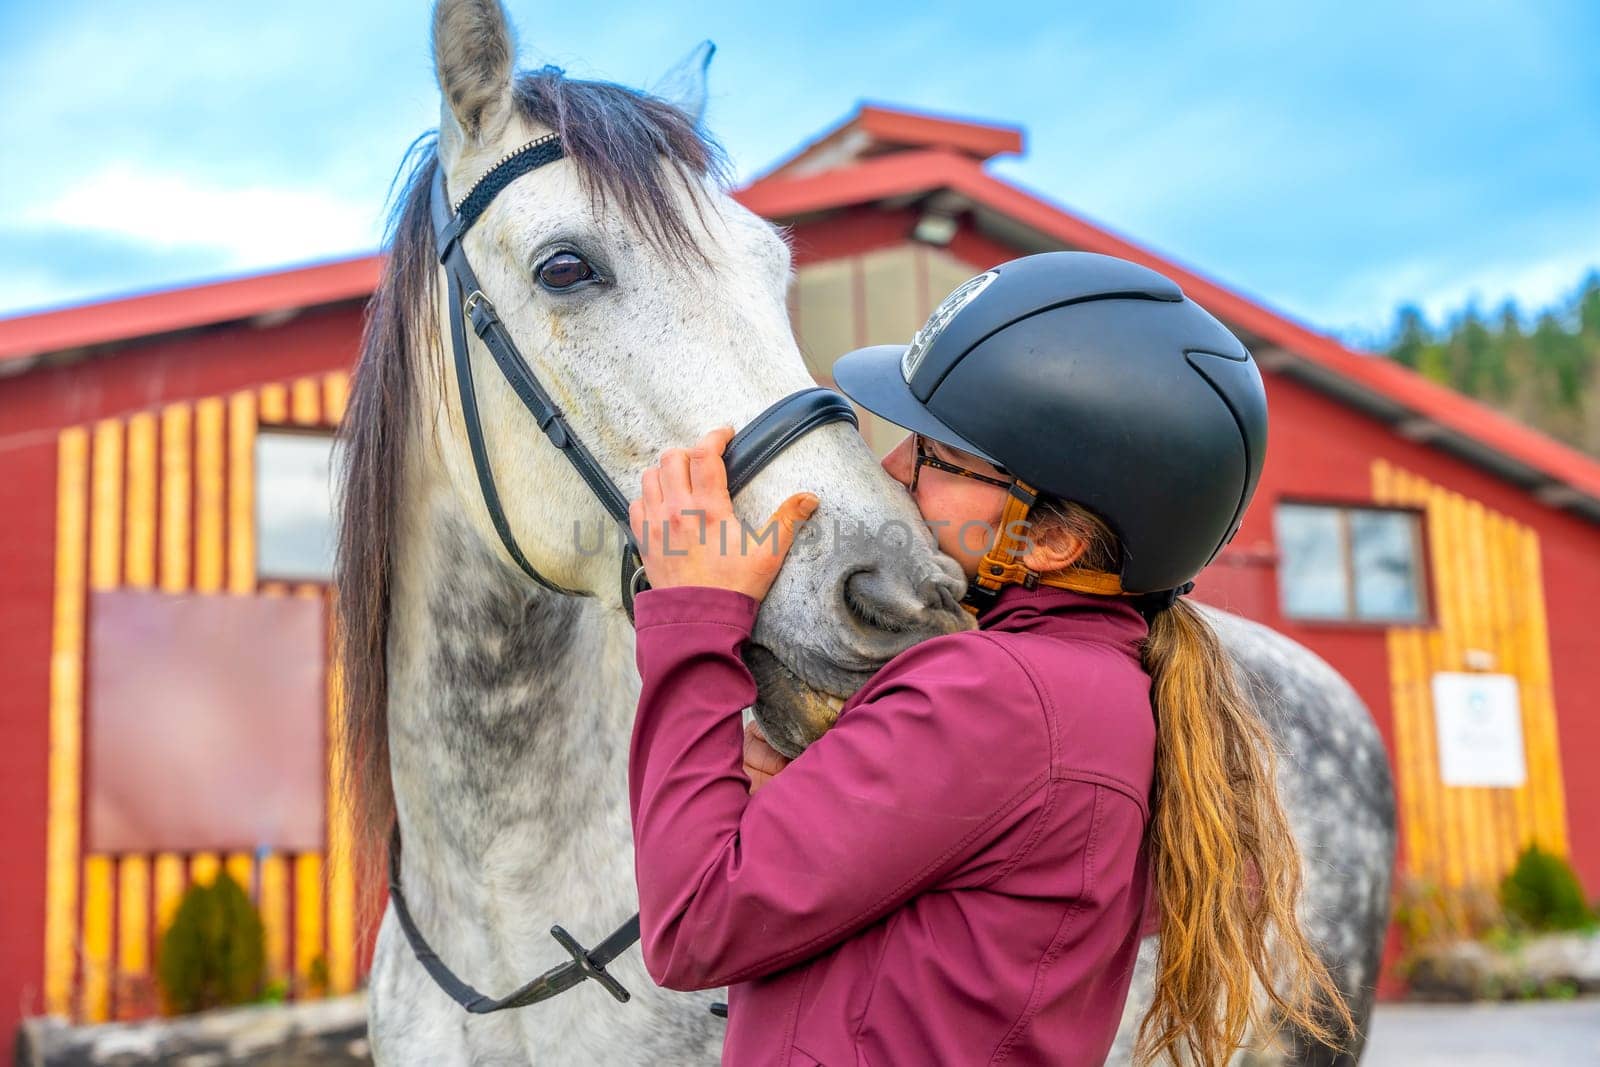 Woman with sport helmet kissing a horse outside an equestrian center